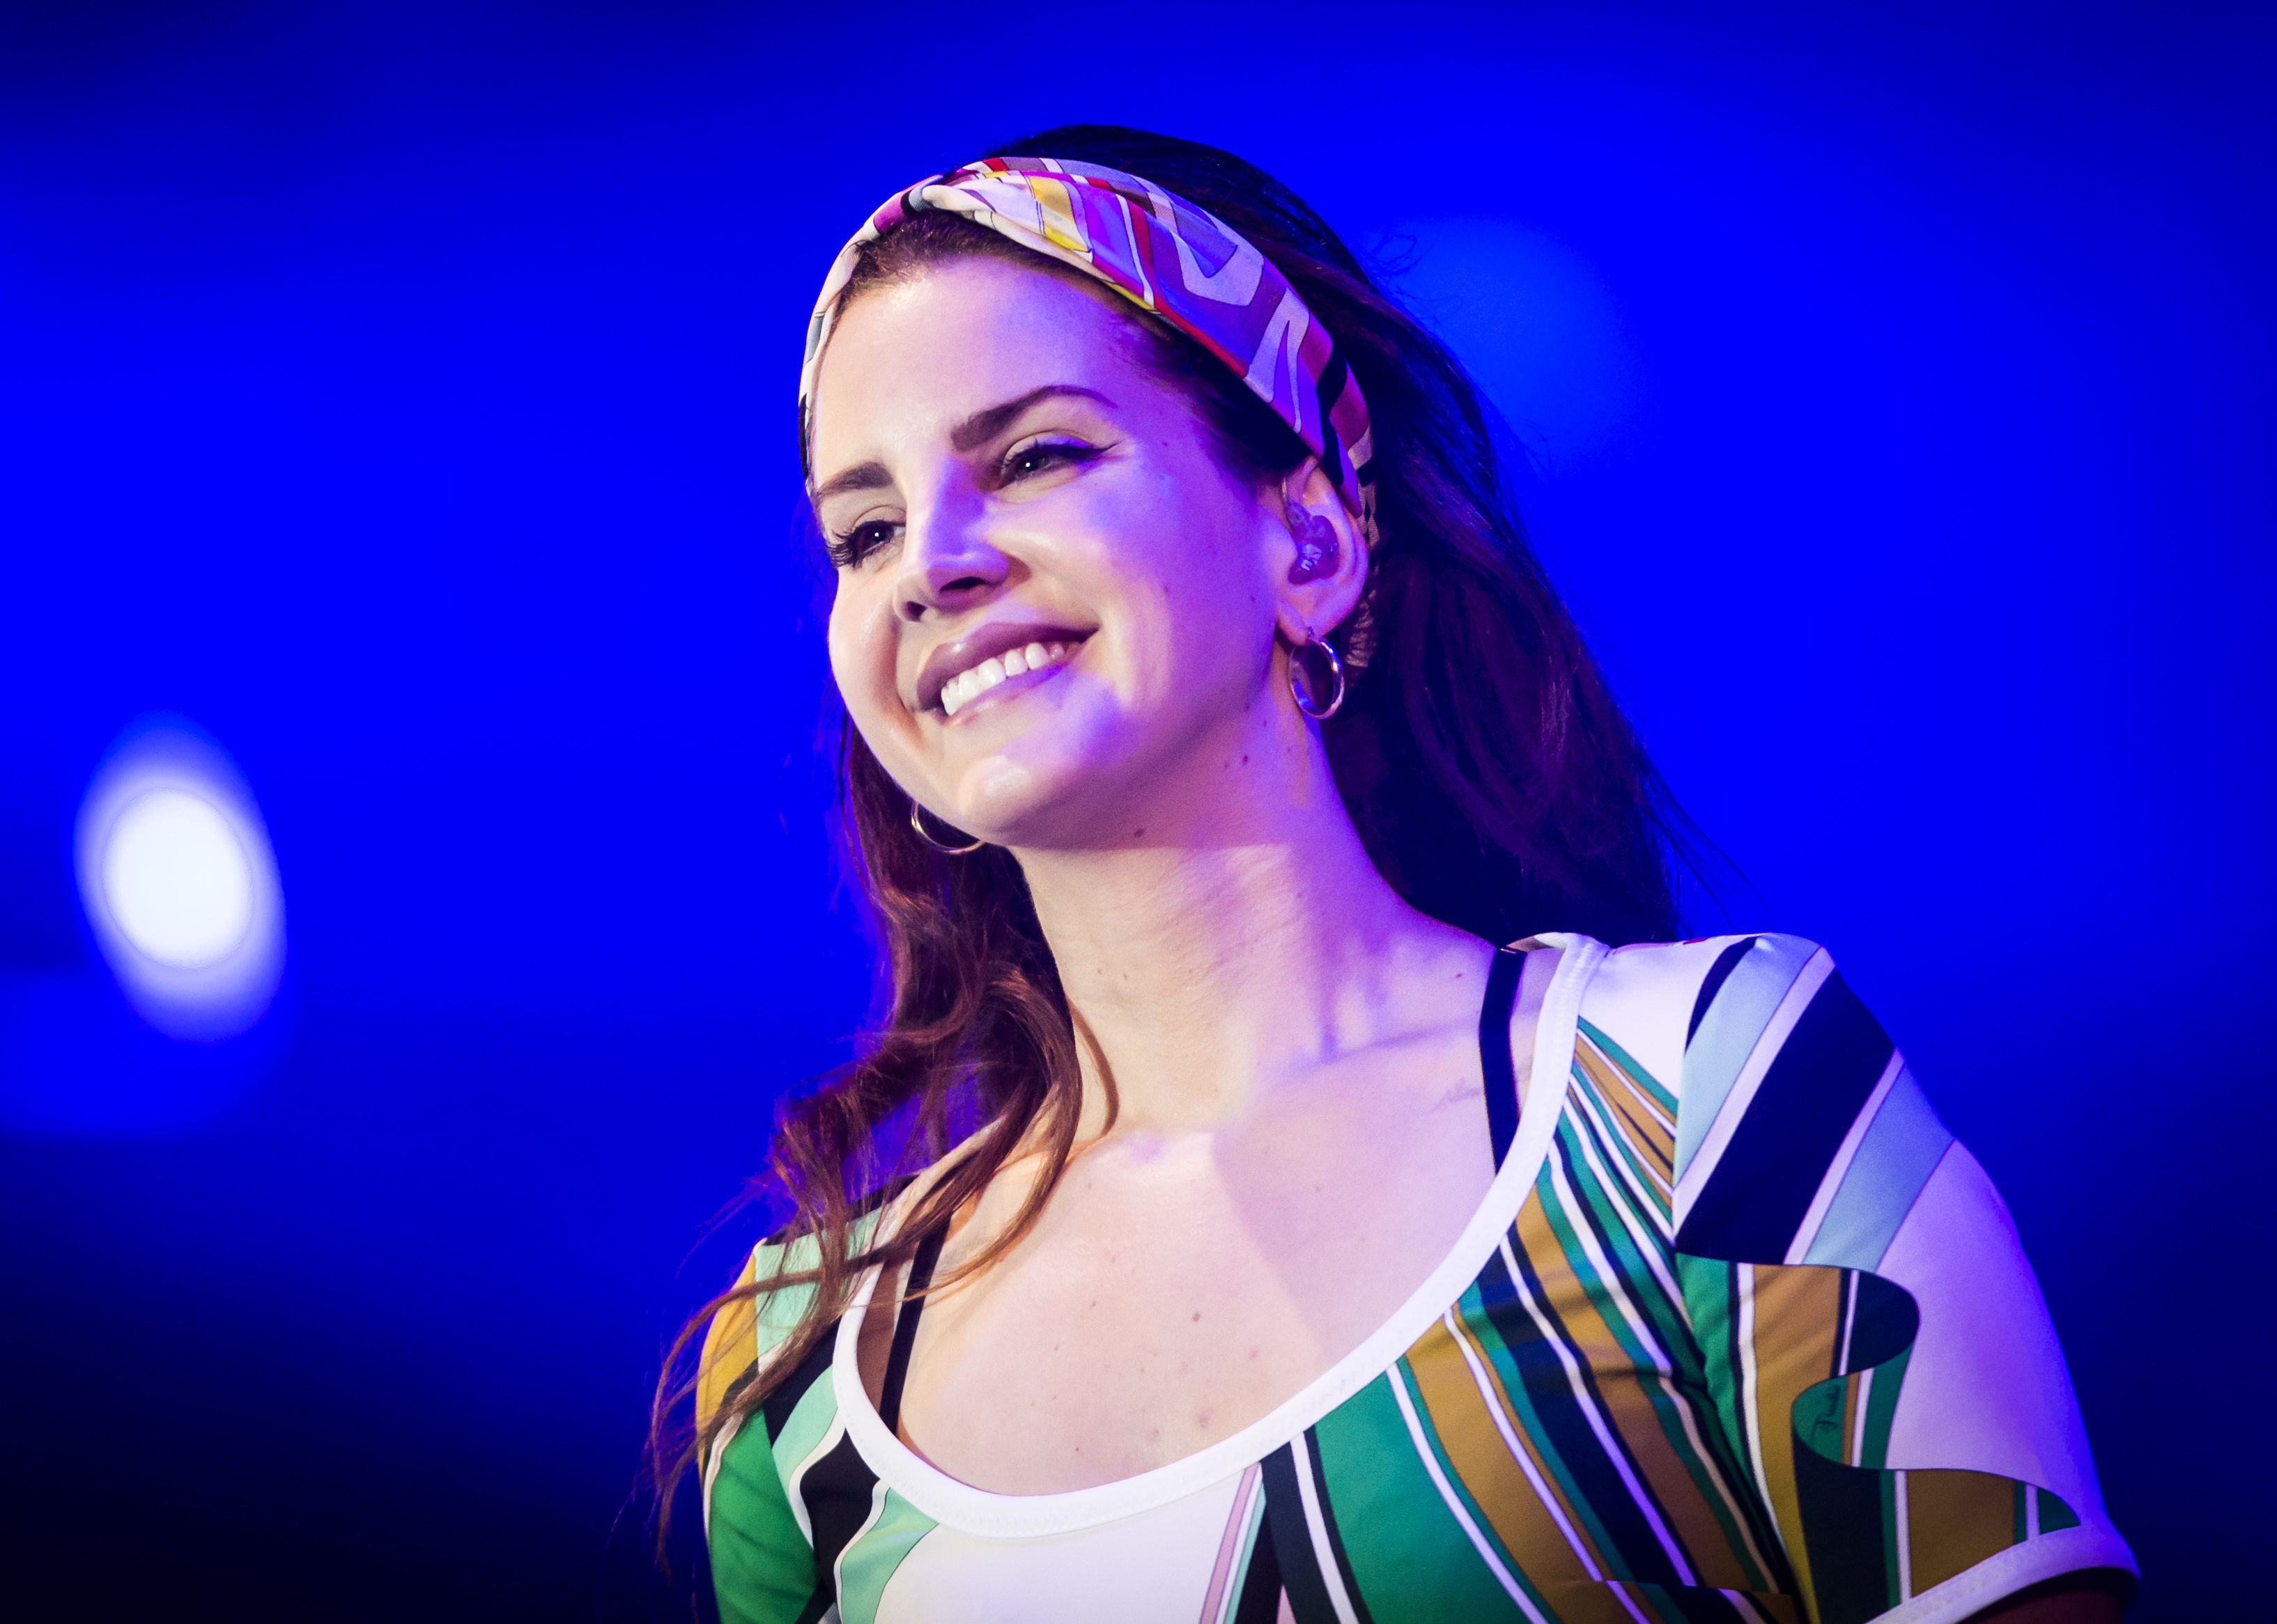 Lana Del Rey Wonderful that people are speaking out about sexual